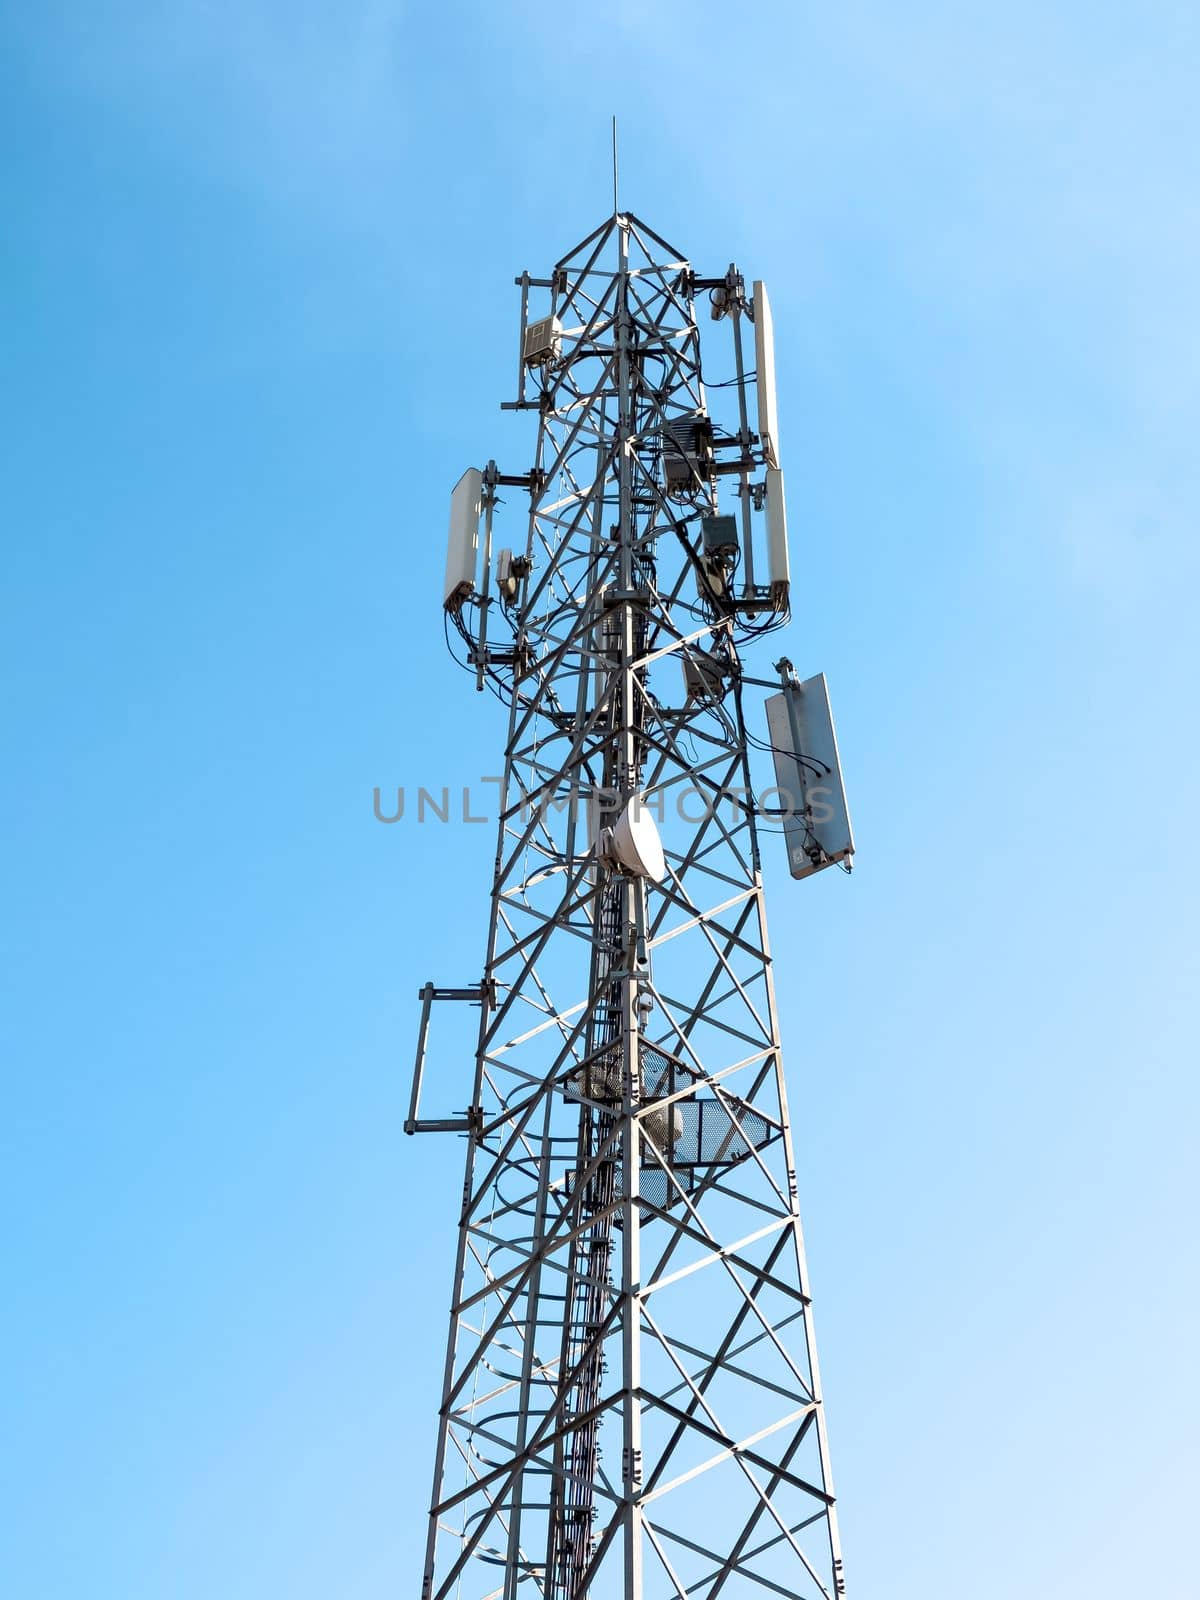 Telecommunication signal tower emitting telephone and television signals on a sunny day by Sonat